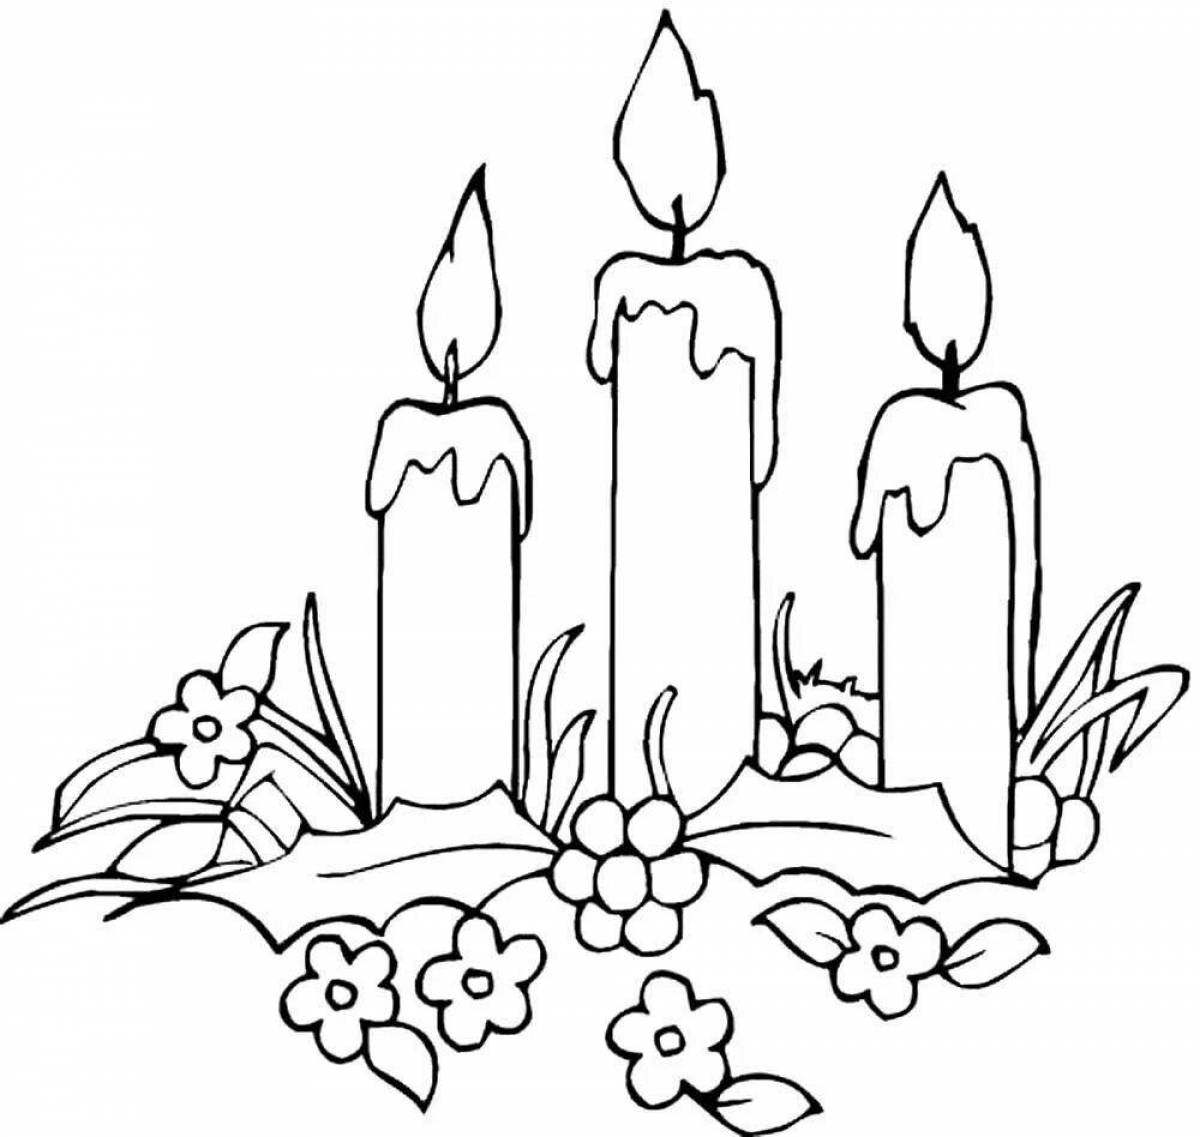 Amazing memory candle coloring book for kids